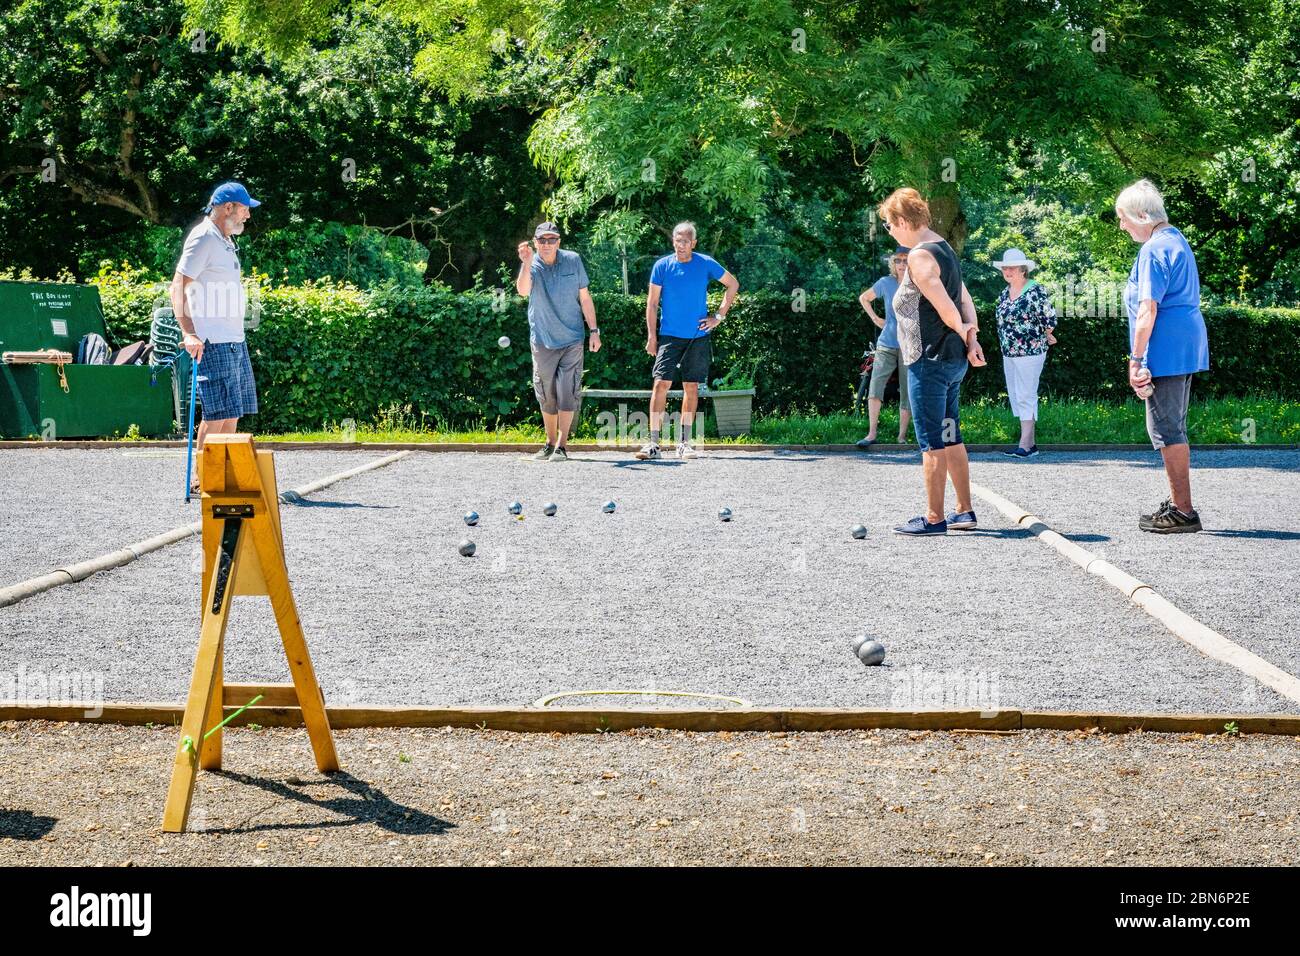 People in Upton Country Park Poole, Dorset, England, Playing the French game of Petanque (boule) Stock Photo